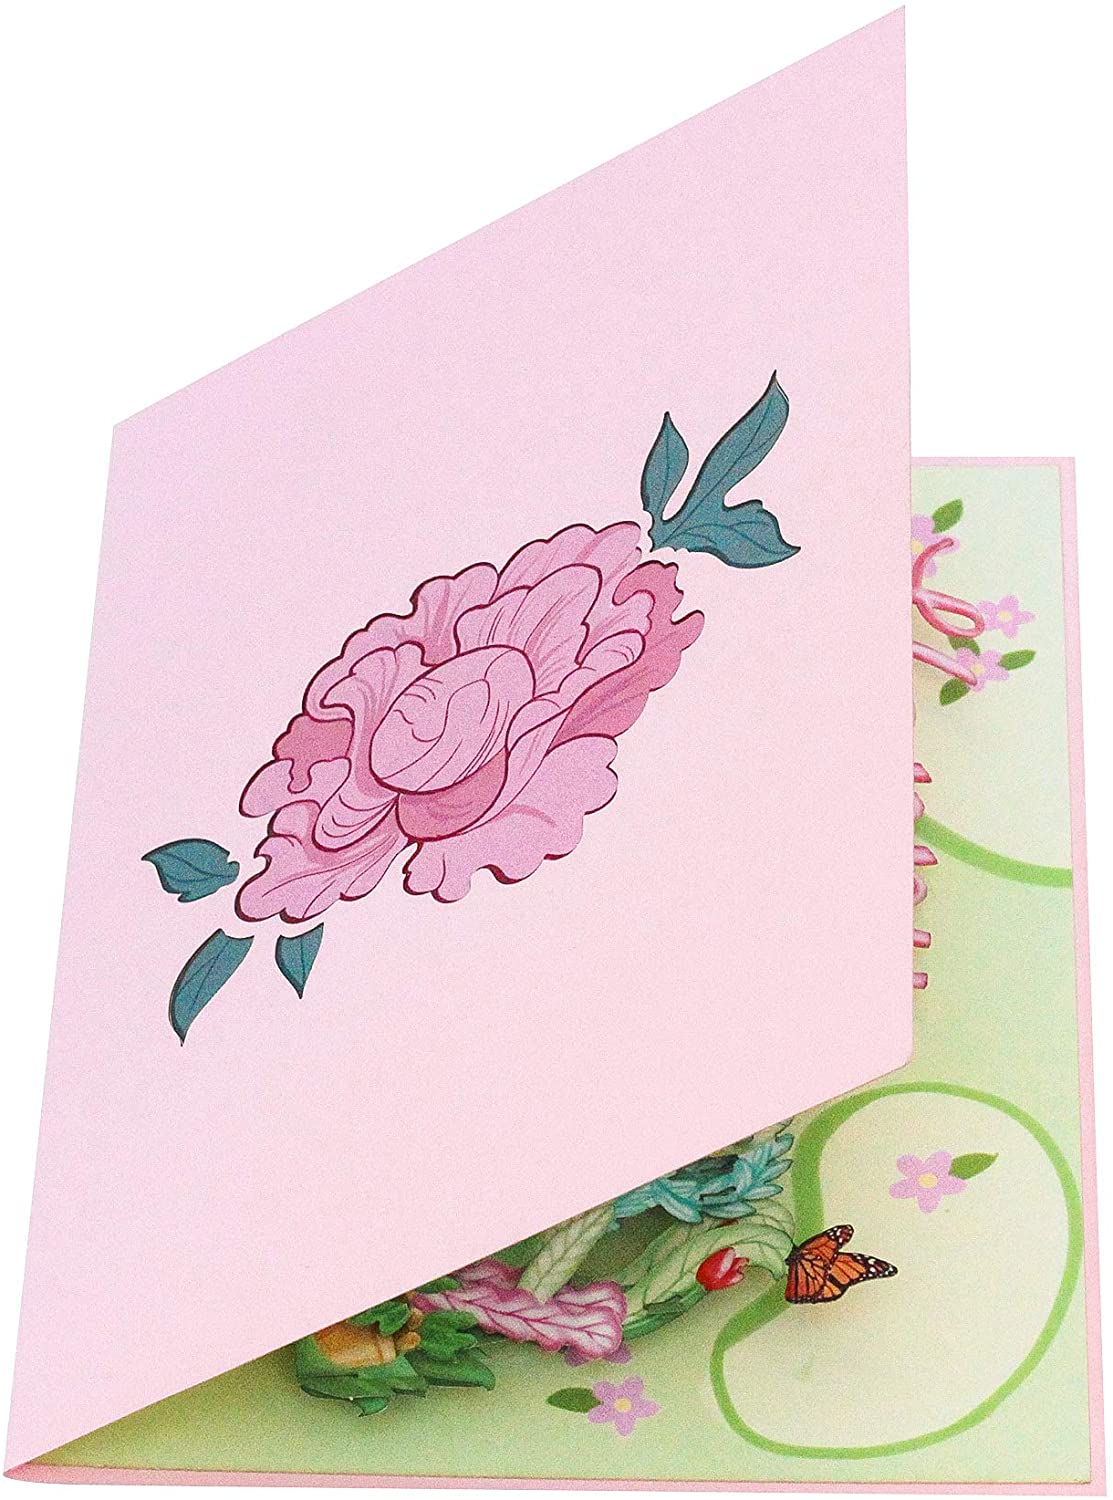 Happy Mother's Day Pop Up Card